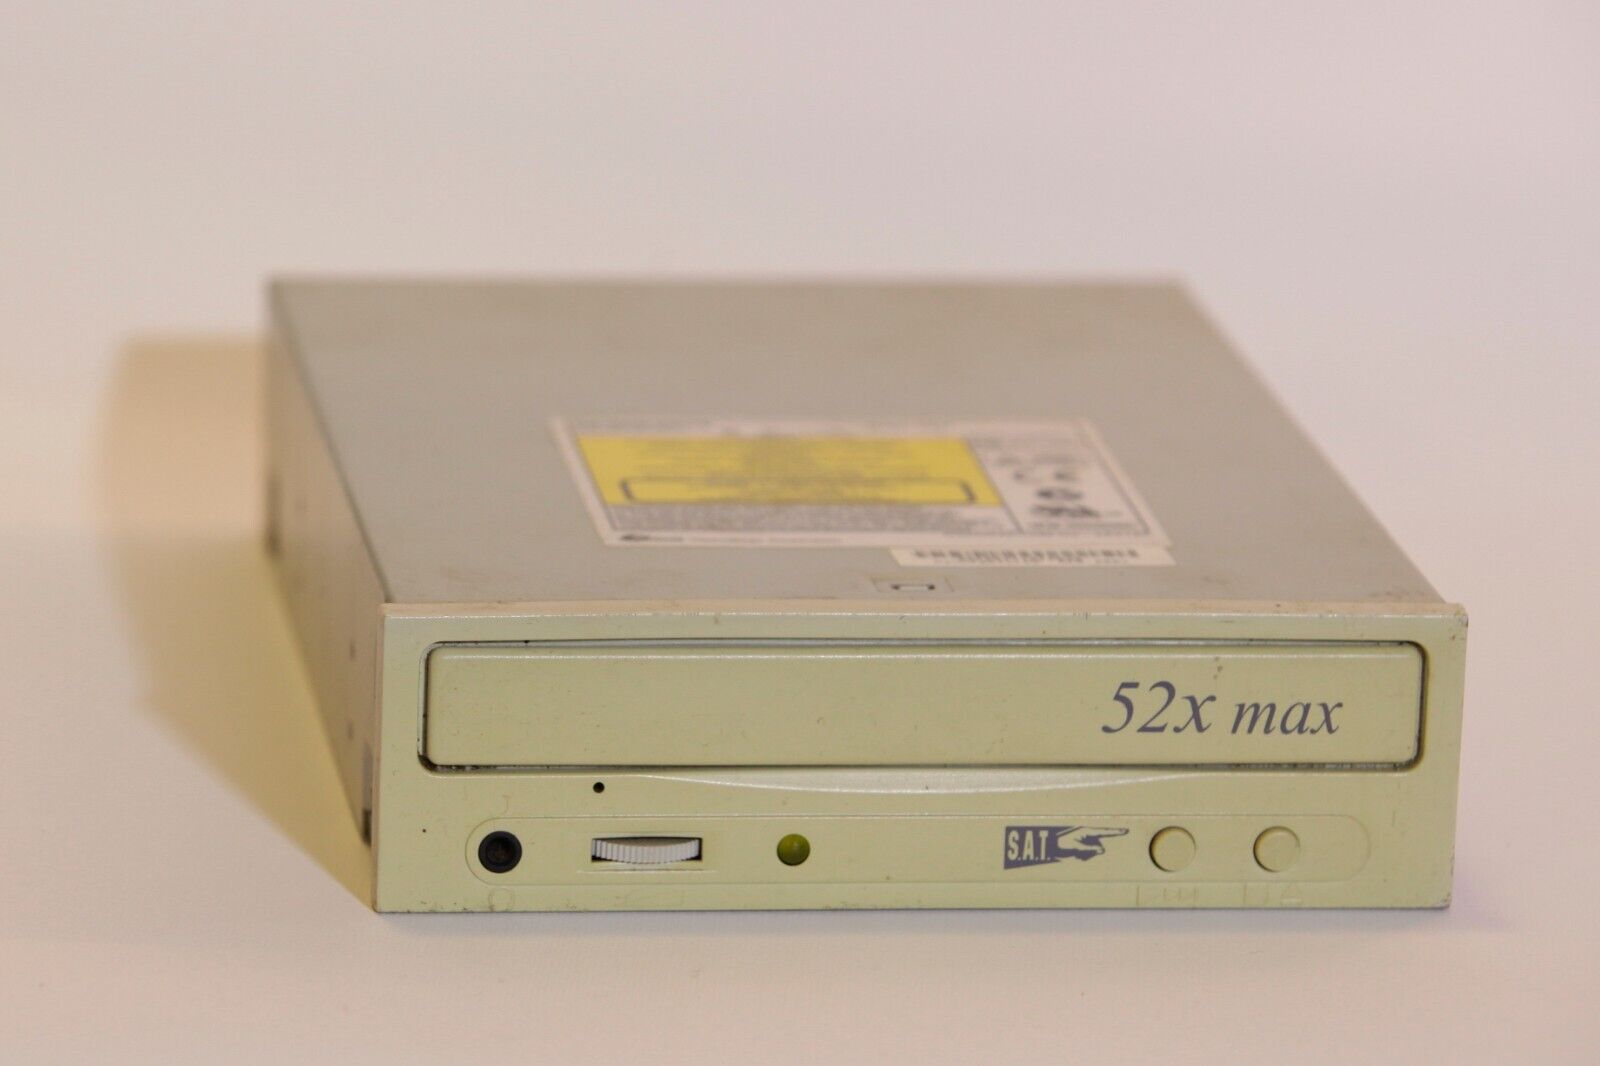 52x max CD-ROM IDE Drive with Audio CD Playback